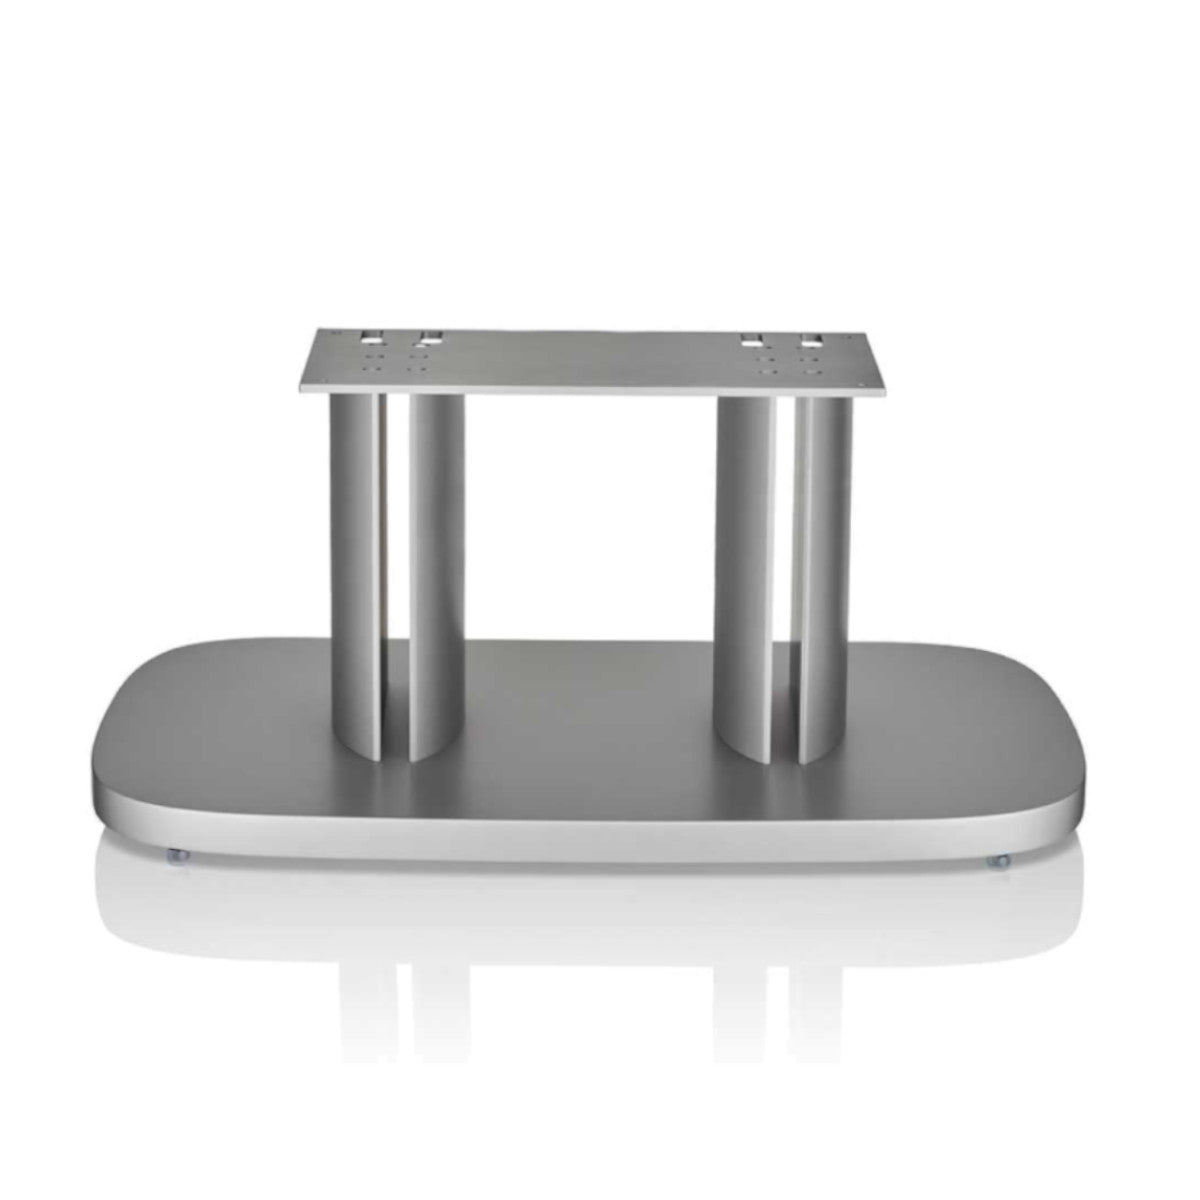 Bowers & Wilkins (B&W) FS-HTM D4 Center Speaker Stand (Silver) - Ooberpad India